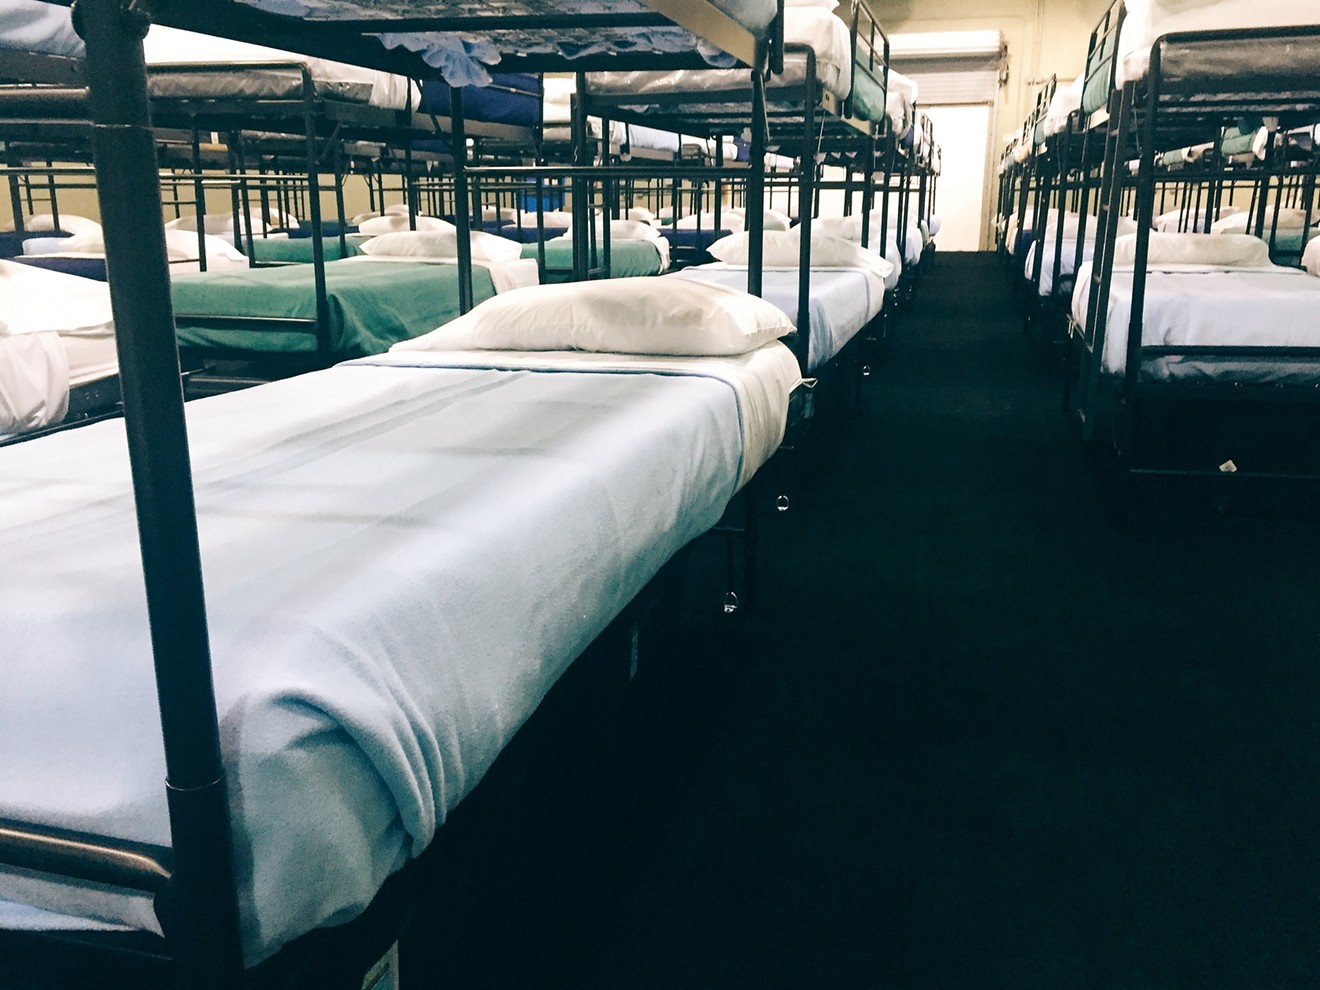 The Homestead Temporary Shelter for Migrant Children in 2016.